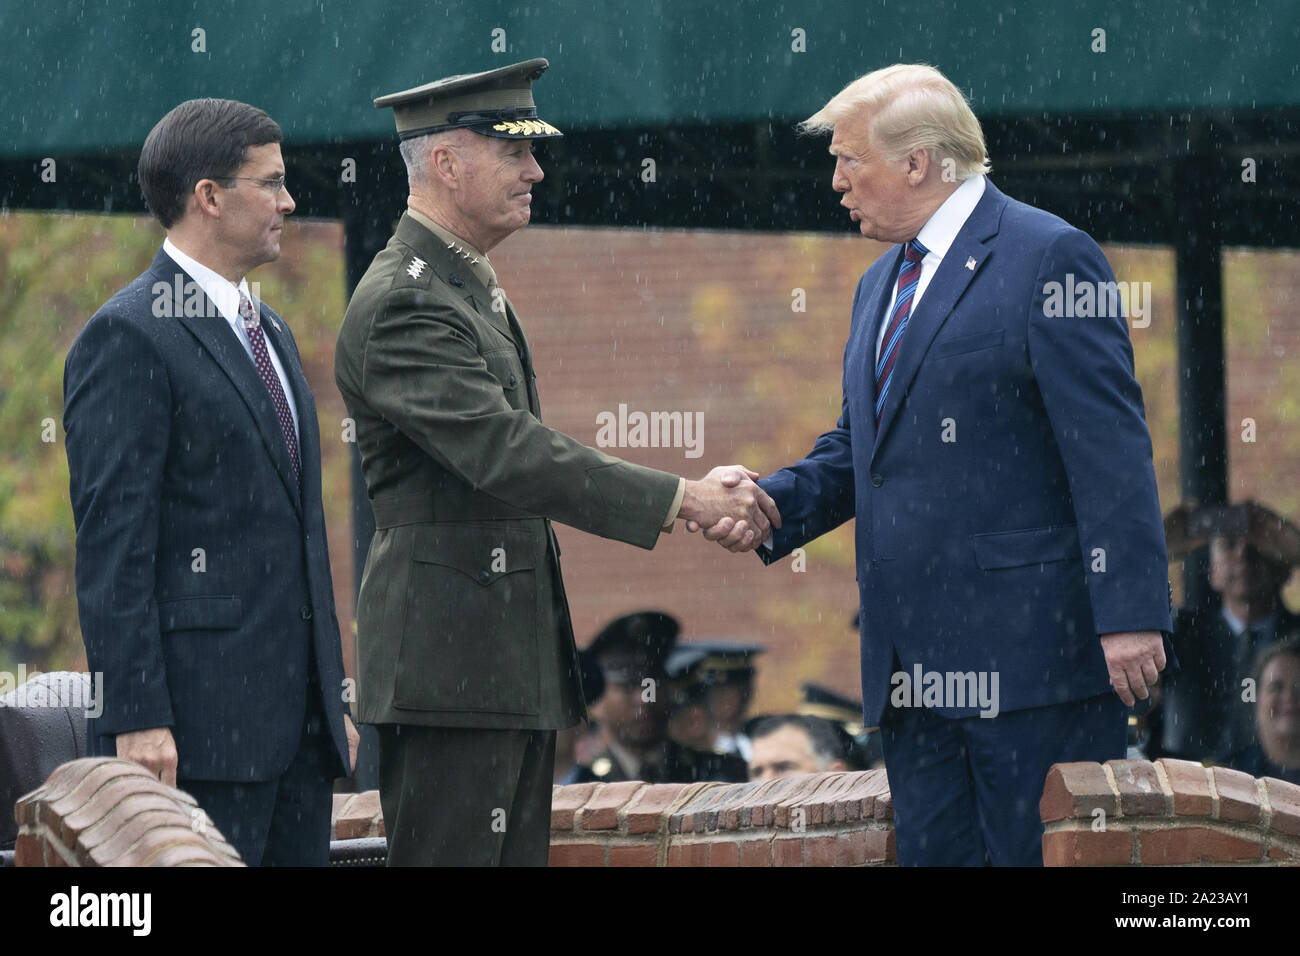 Arlington, United States. 30th Sep, 2019. United States President Donald J. Trump greets outgoing Chairman of the Joint Chiefs of Staff General Joseph Dunford during the Armed Forces Welcome Ceremony in honor of the Twentieth Chairman of the Joint Chiefs of Staff Mark Milley at Joint Base Myer in Arlington, Virginia on September 30, 2019. Photo by Chris Kleponis/UPI Credit: UPI/Alamy Live News Stock Photo